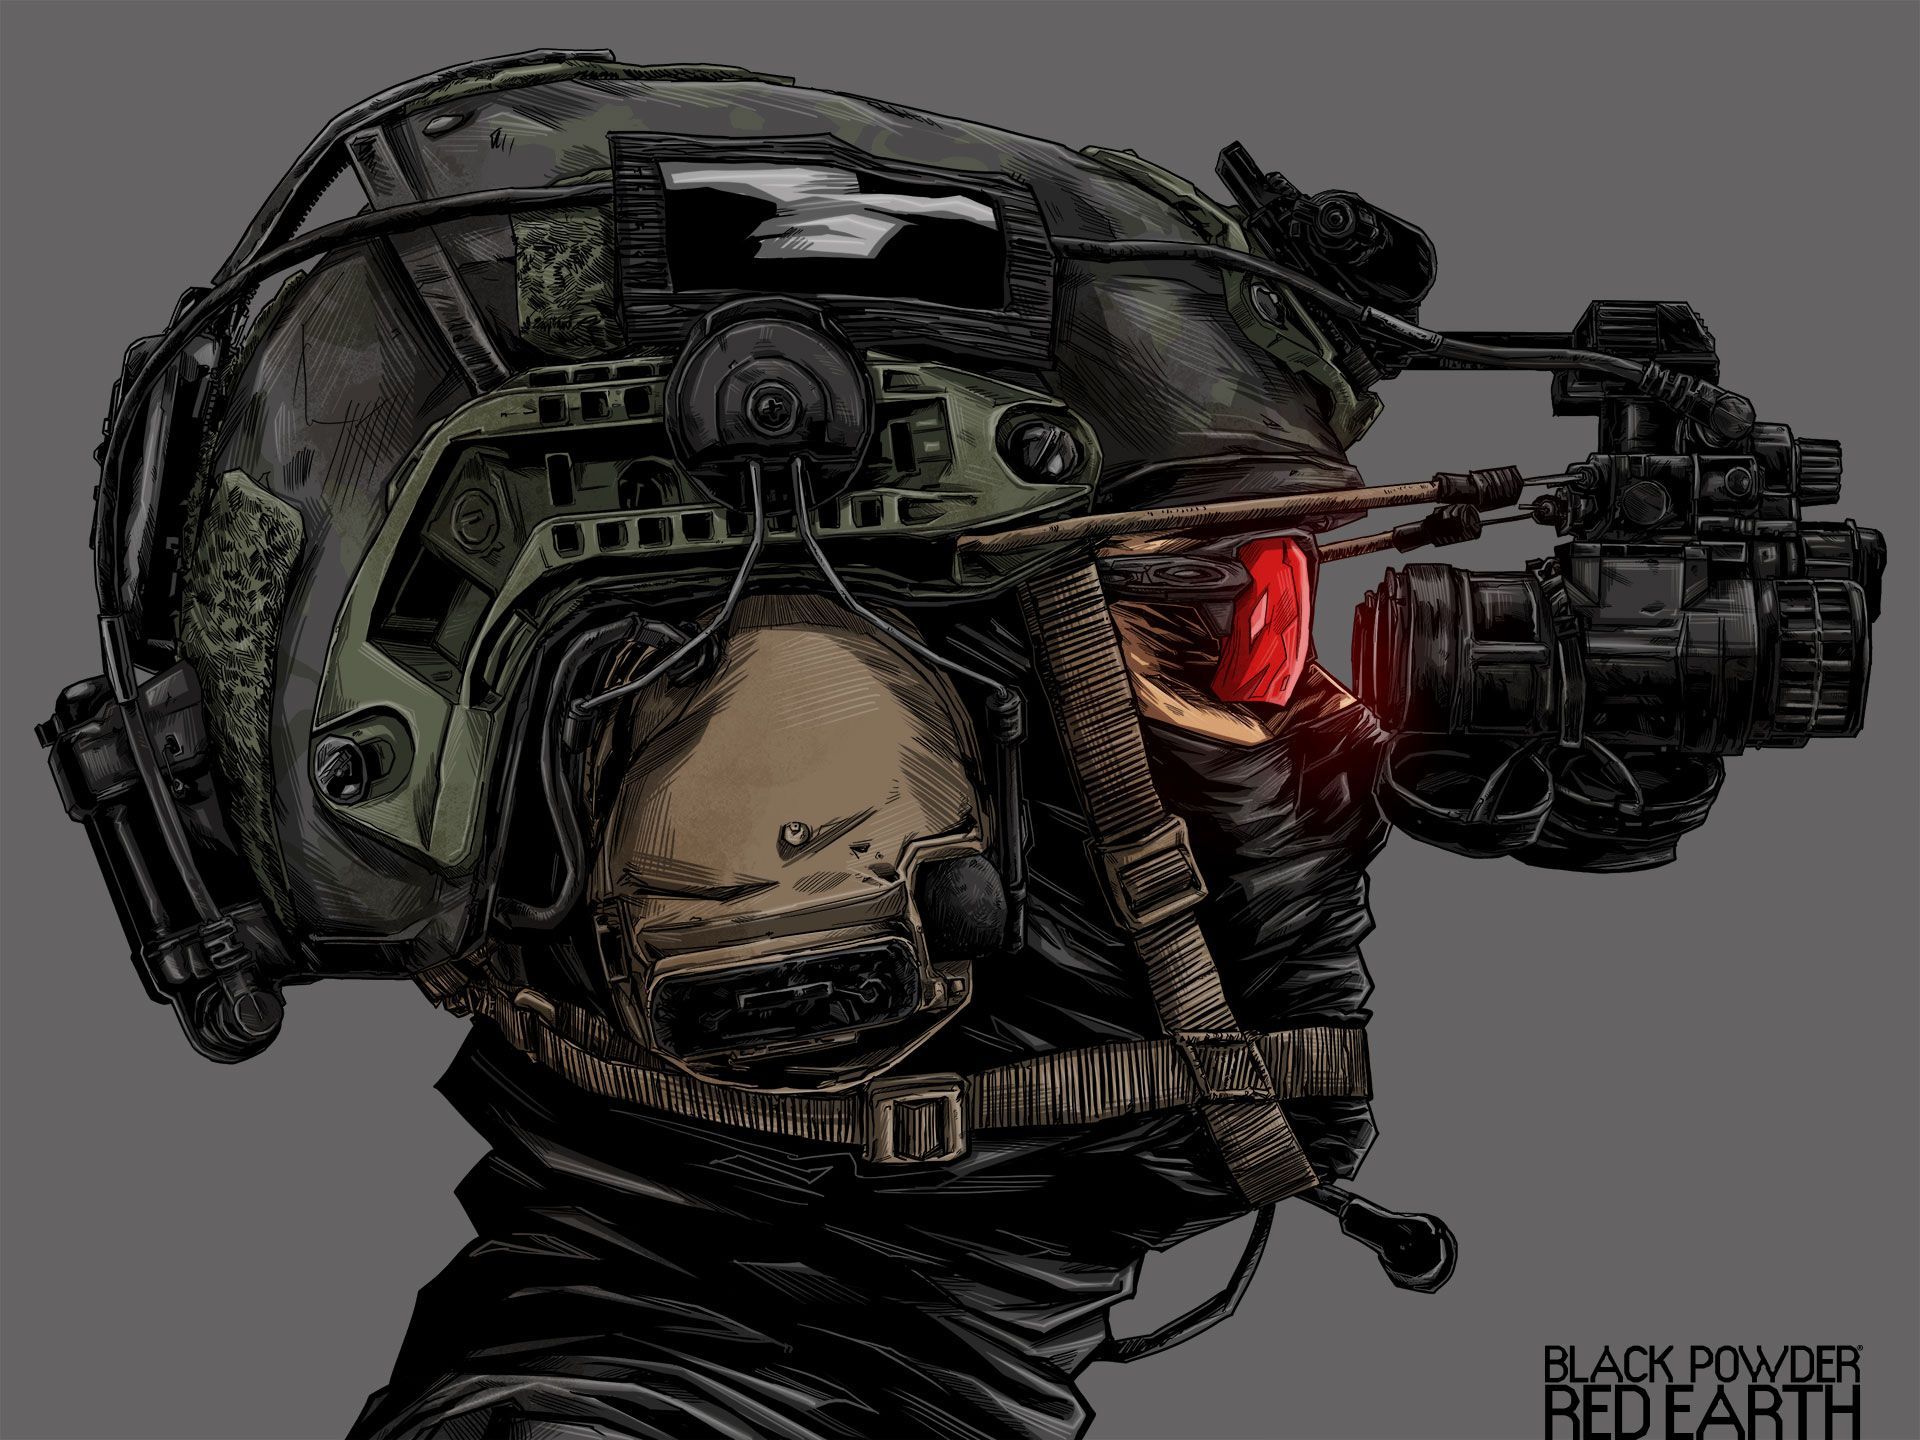 Black Powder. Red Earth® is creating a new modern warfare gaming and animated series. Patreon. Military art, Military special forces, Military drawings